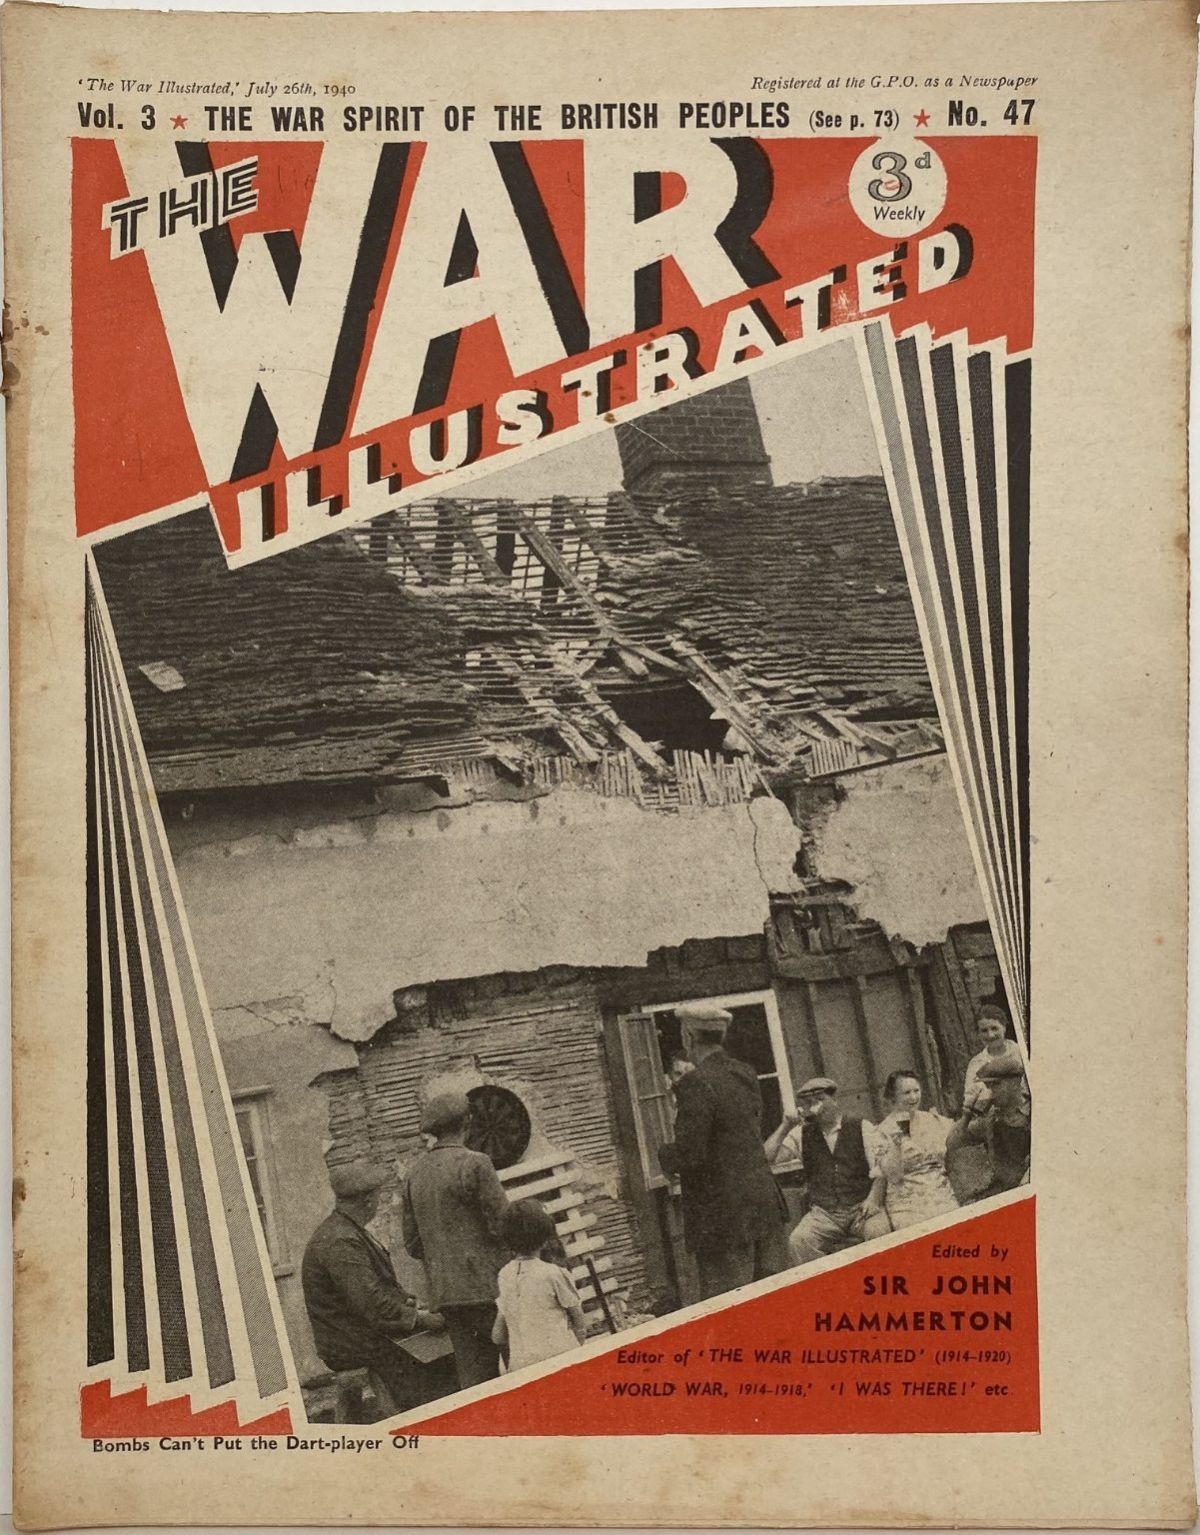 THE WAR ILLUSTRATED - Vol 3, No 47, 26th July 1940